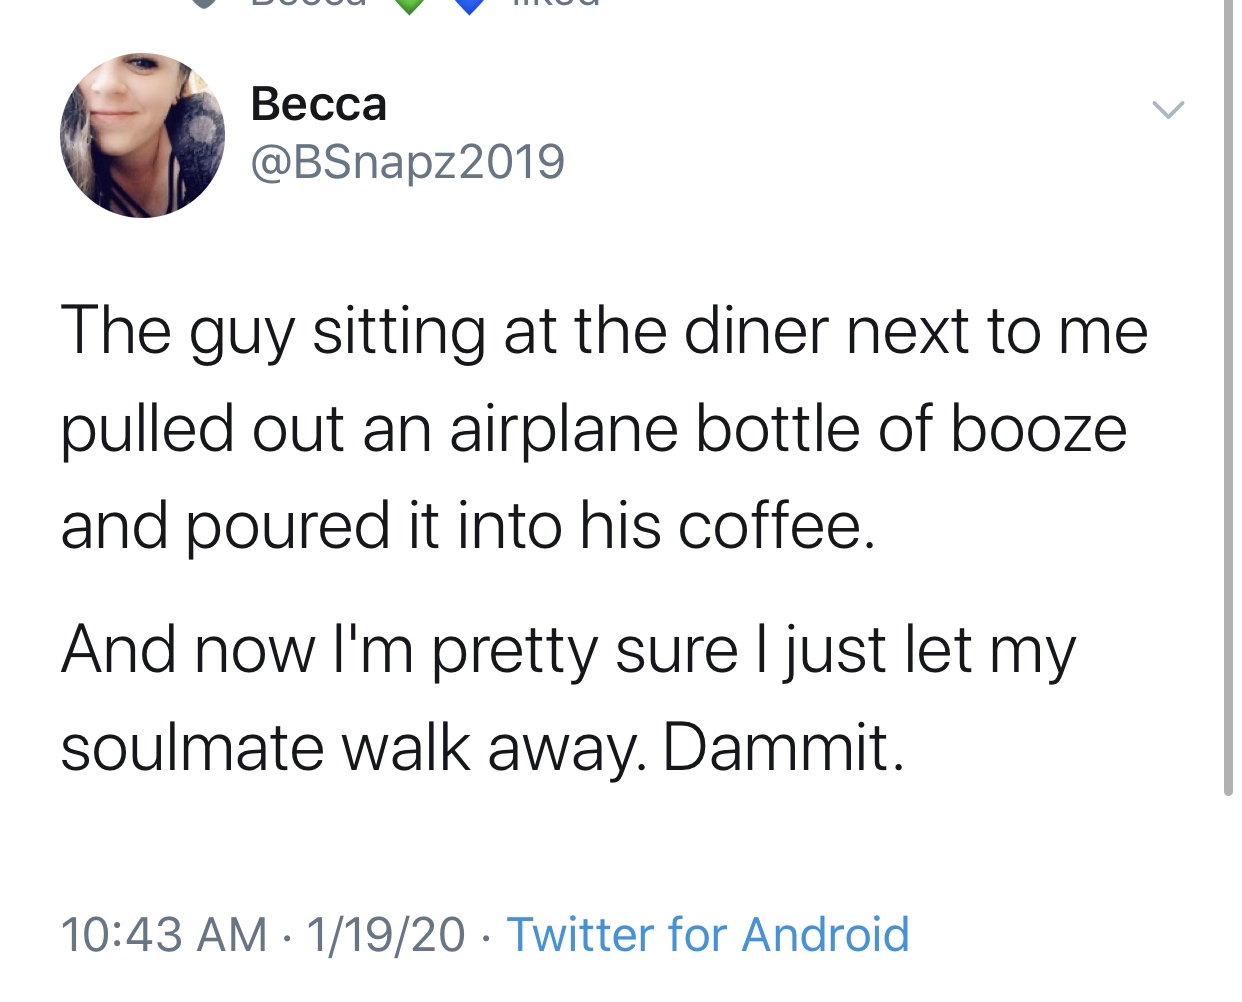 angle - Becca The guy sitting at the diner next to me pulled out an airplane bottle of booze and poured it into his coffee. And now I'm pretty sure I just let my soulmate walk away. Dammit. 11920 Twitter for Android